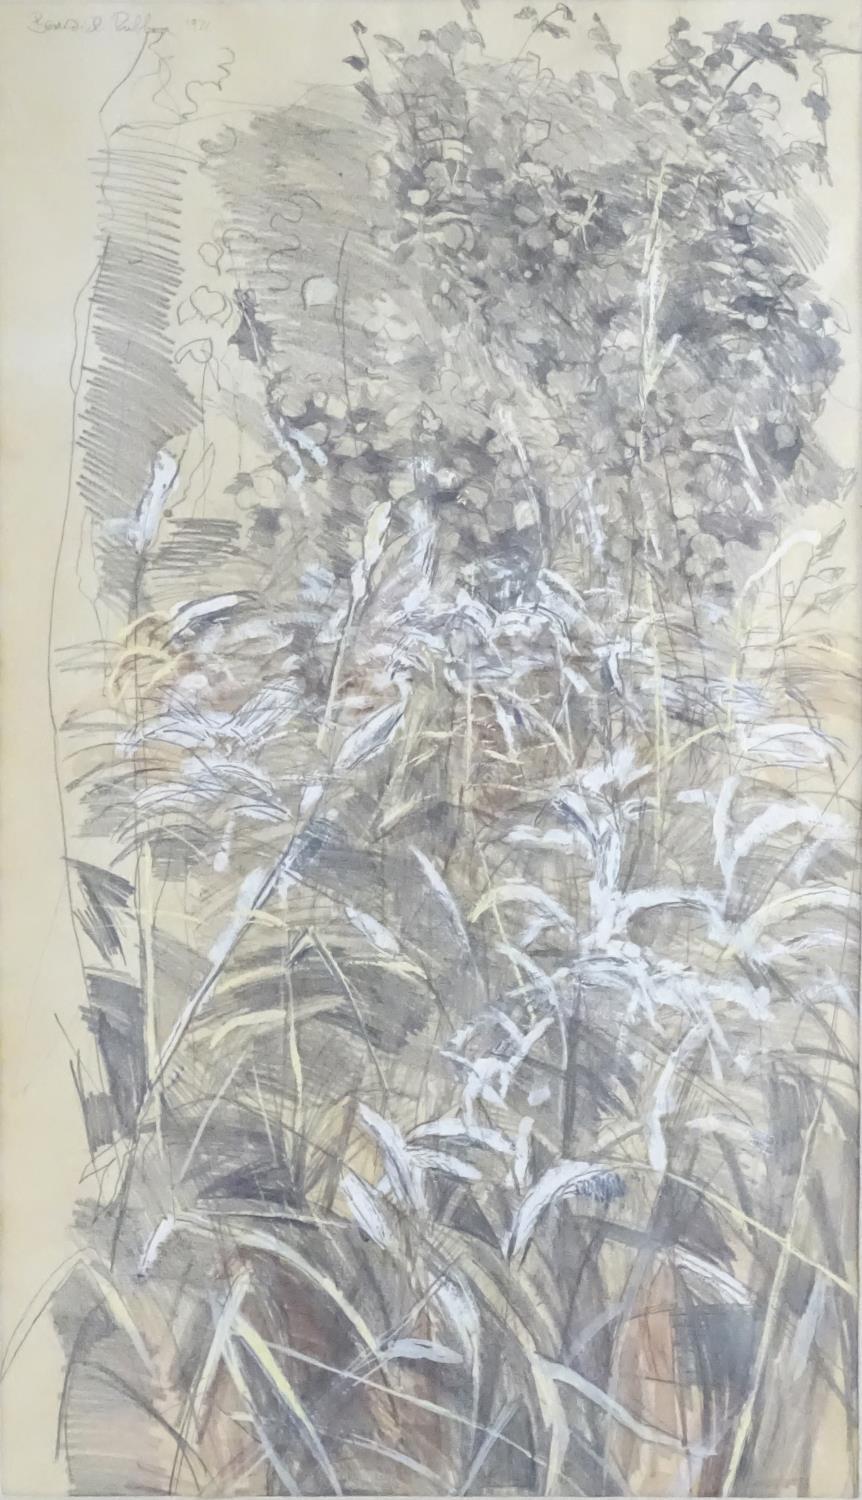 Benedict Rubbra (b. 1938), Mixed media on paper, An abstract study of vegetation. Signed and dated